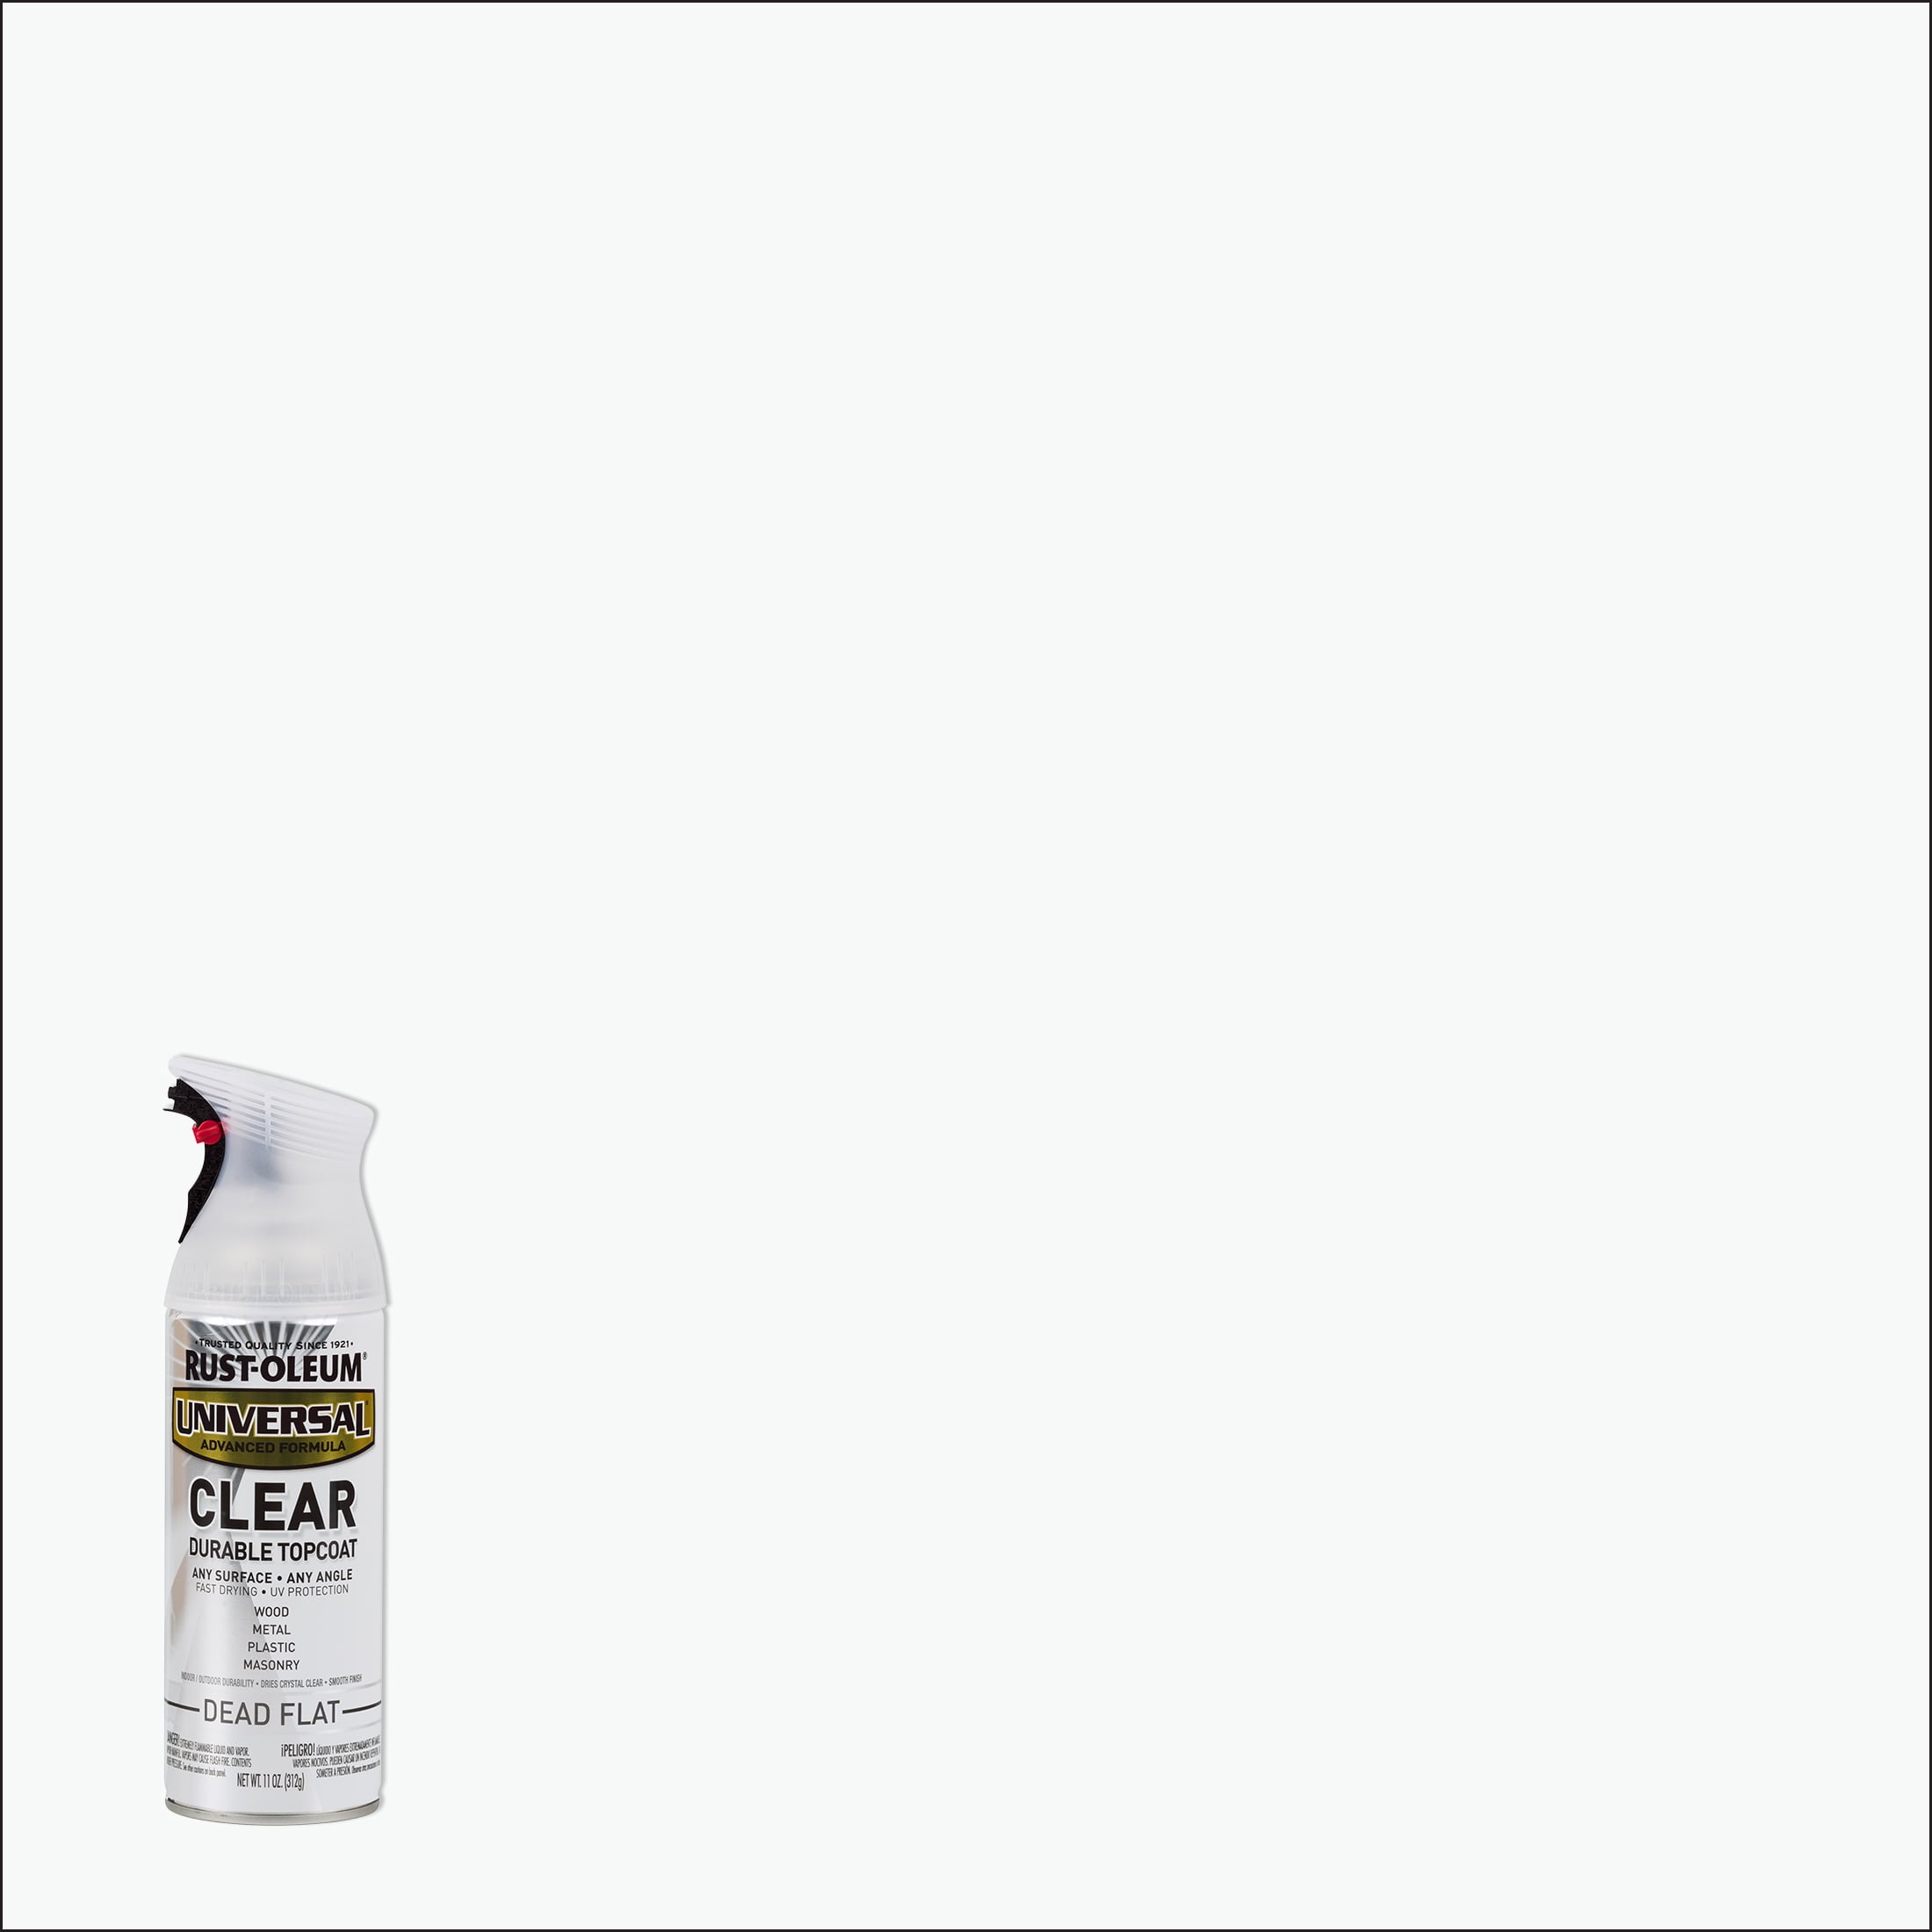 Rust-Oleum 249132-6PK Universal All Surface Metallic Spray Paint, 11 oz,  Aged Copper, 6 Pack 